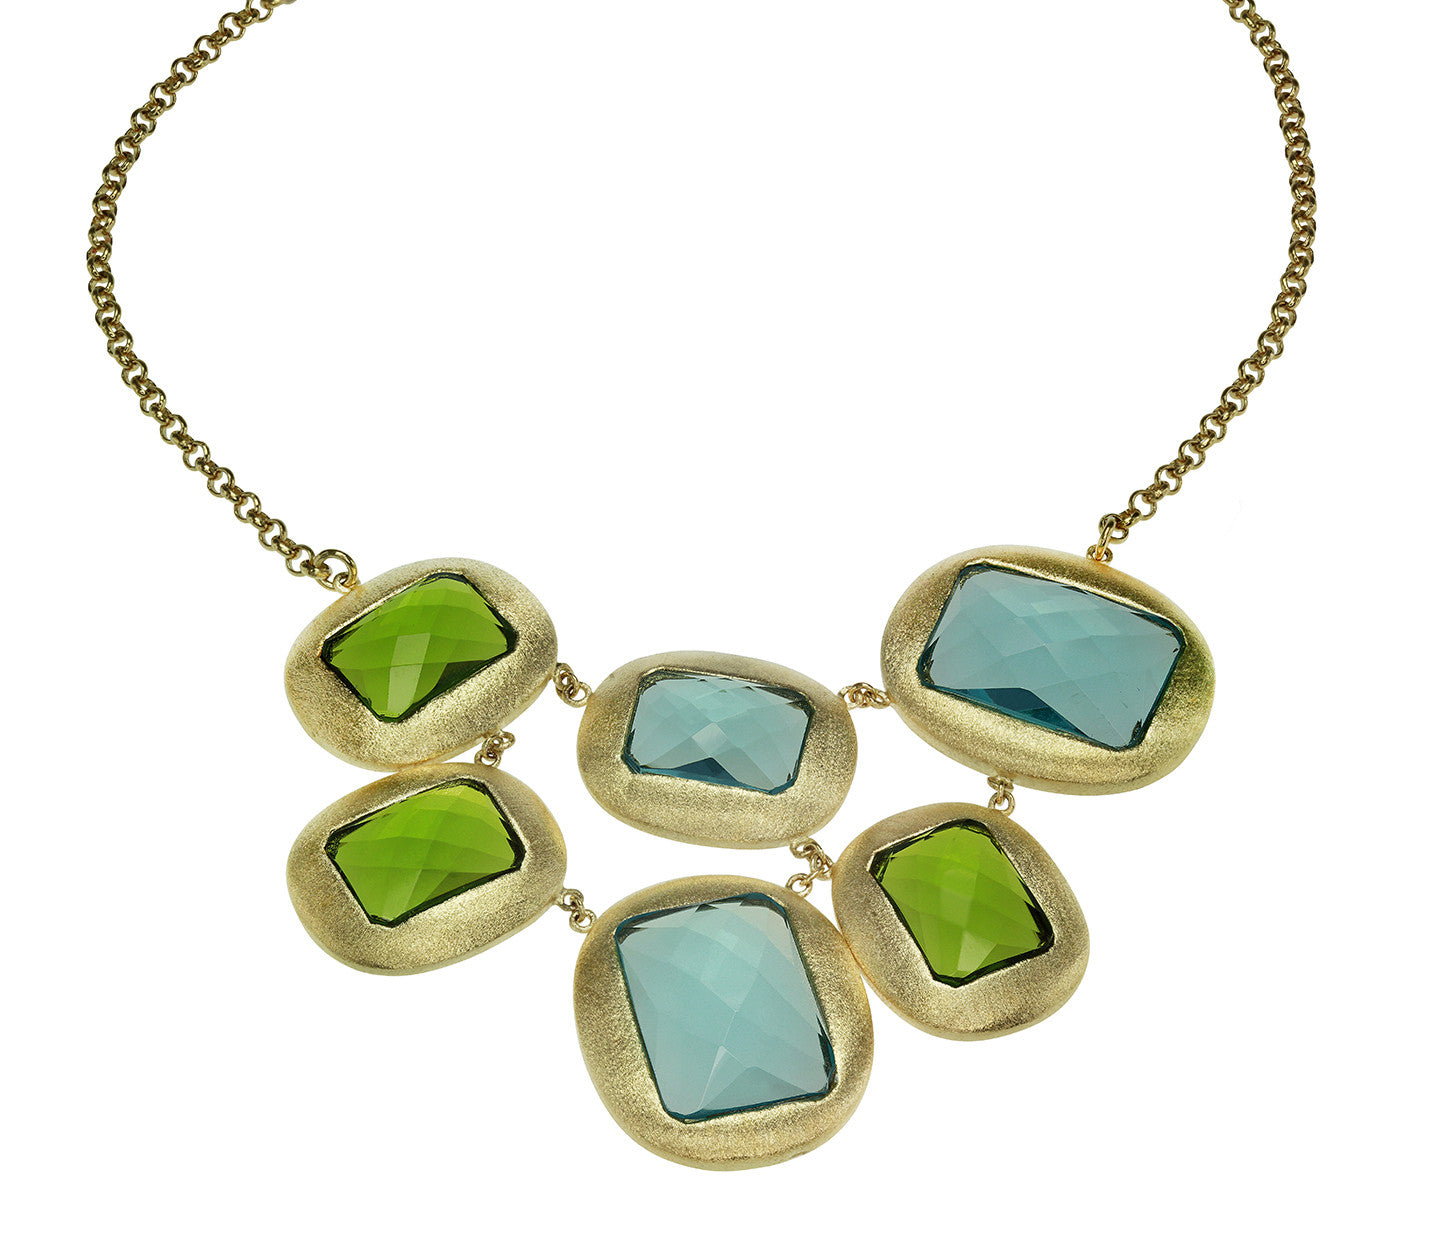 18K YG Plated "Mosaic" Blue and Green Crystal Necklace